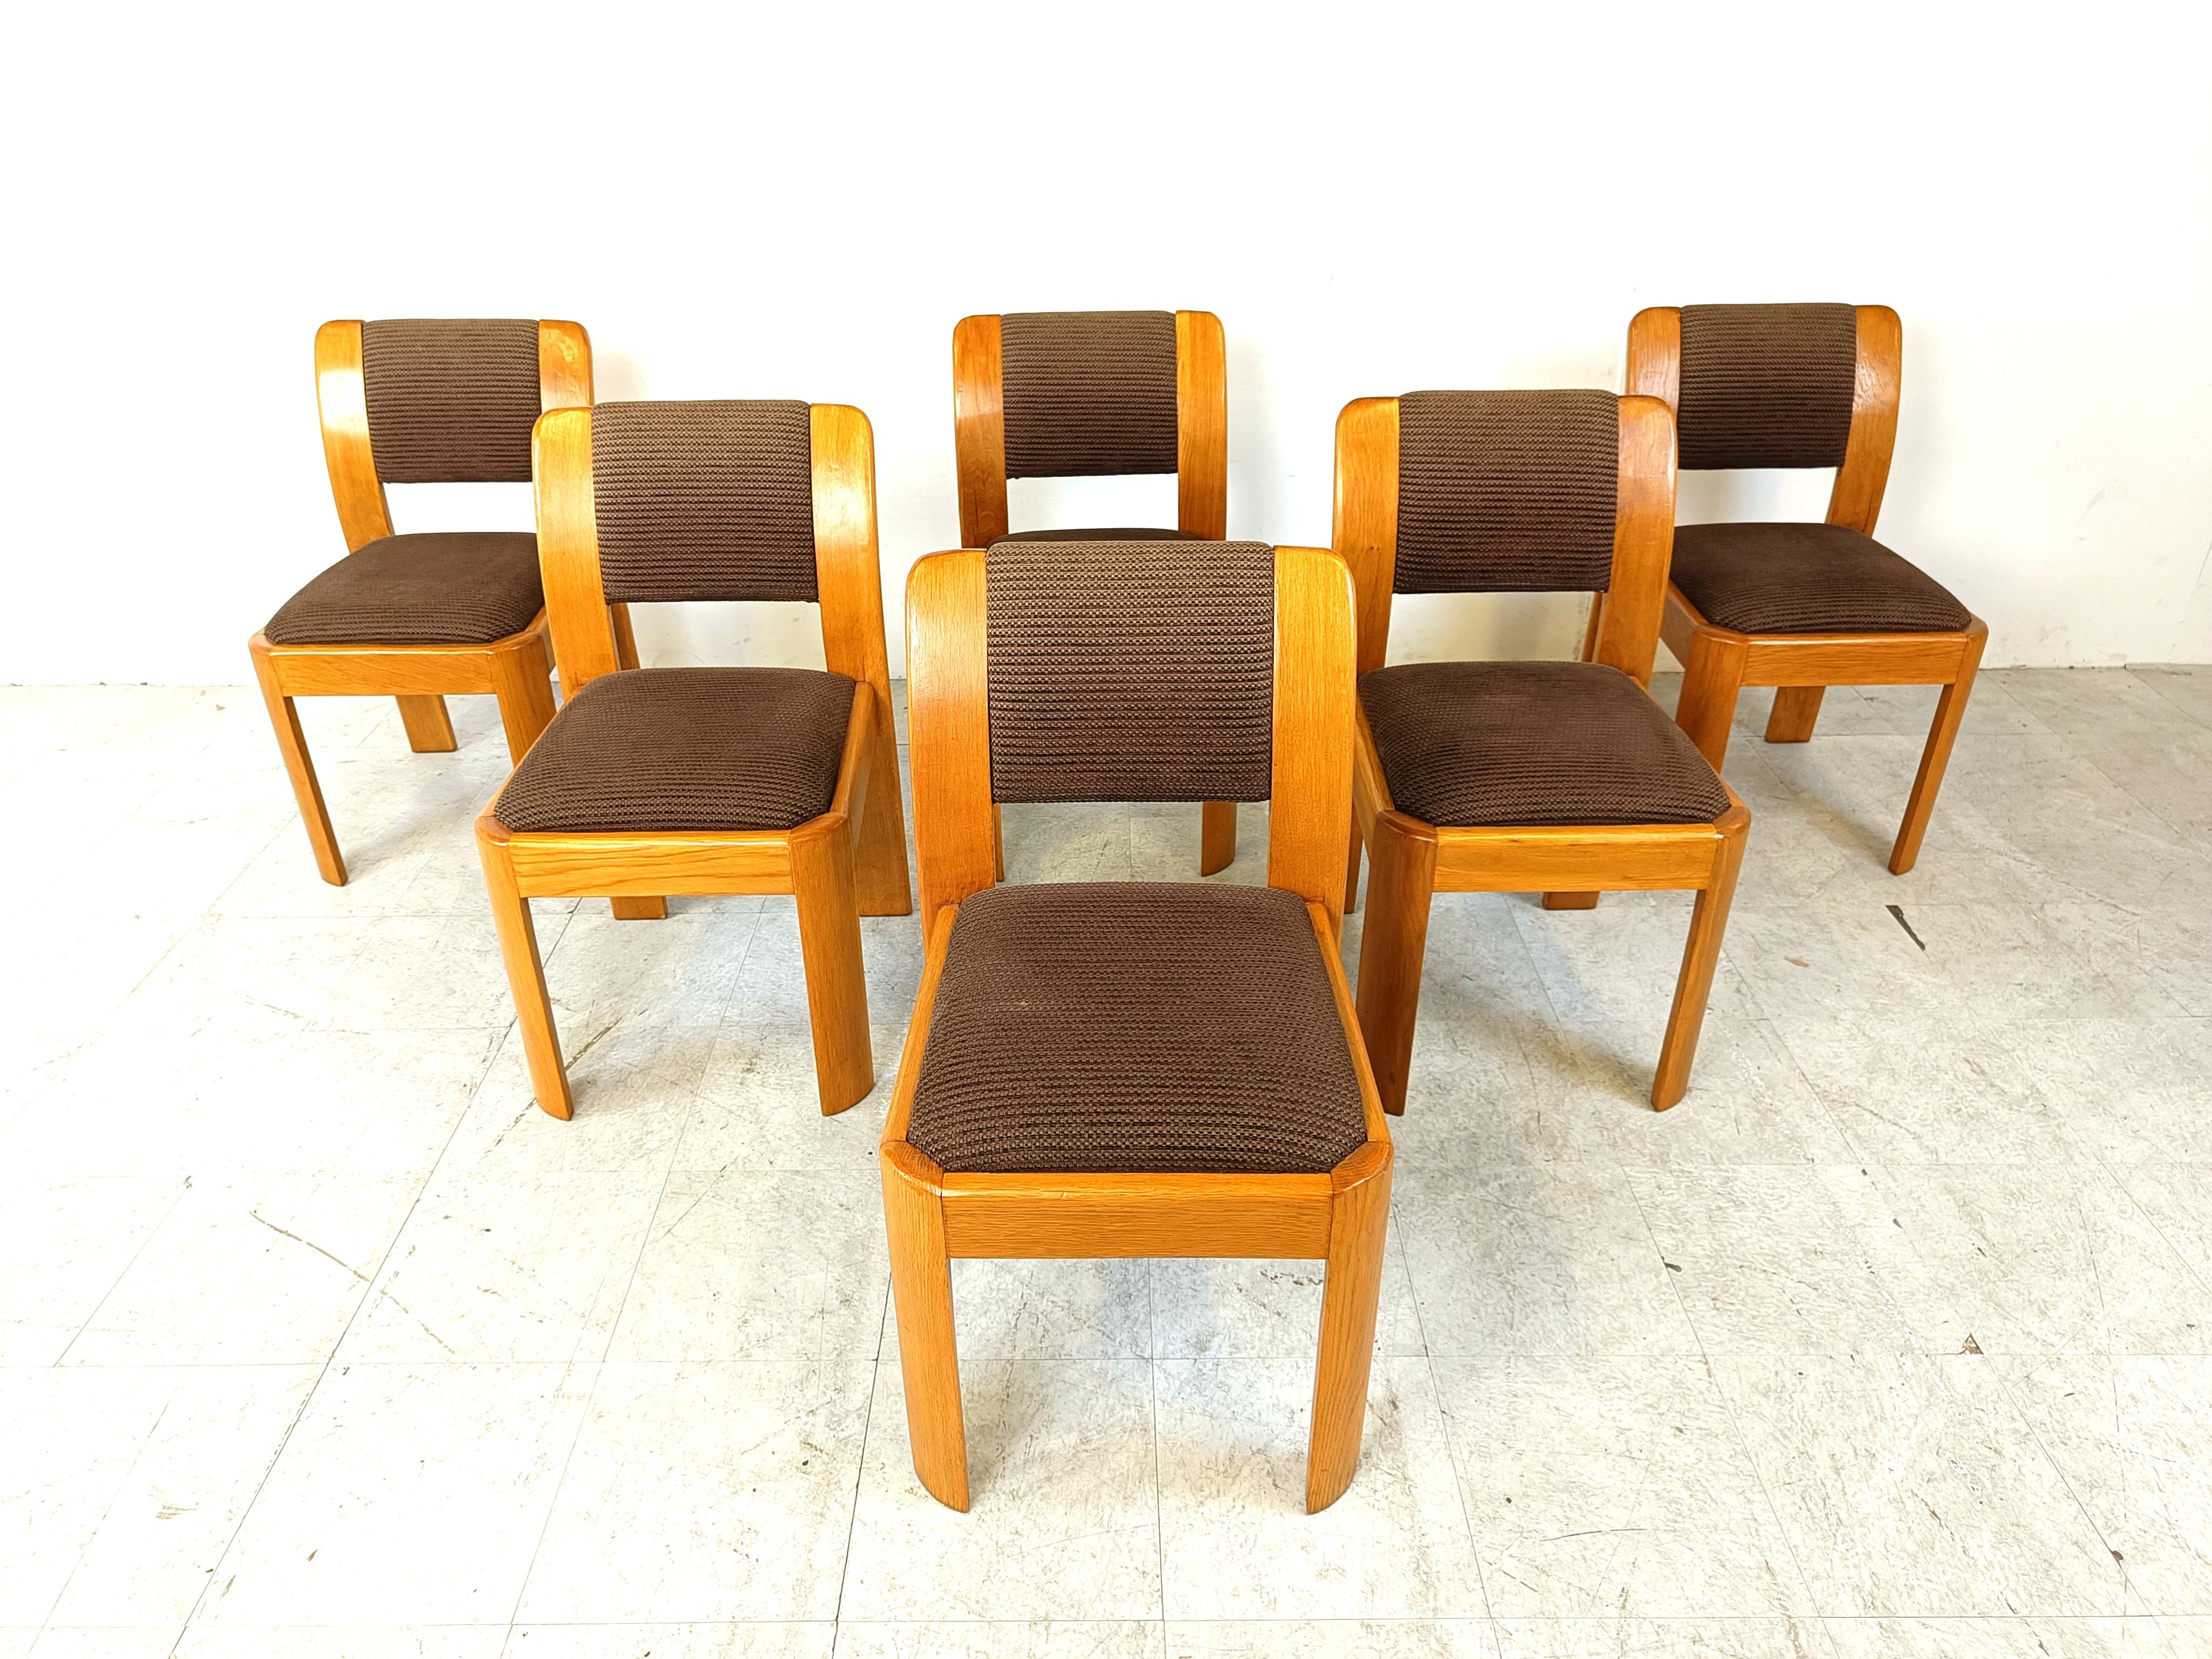 Mid century brutalist dining chairs with their original comfy brown fabric upholstery.

Very sturdy chairs with a nice and simply designed oak frame.

Good original condition.

1960s - Germany

Dimensions:
Height: 85cm
Seat height: 47cm
Width: